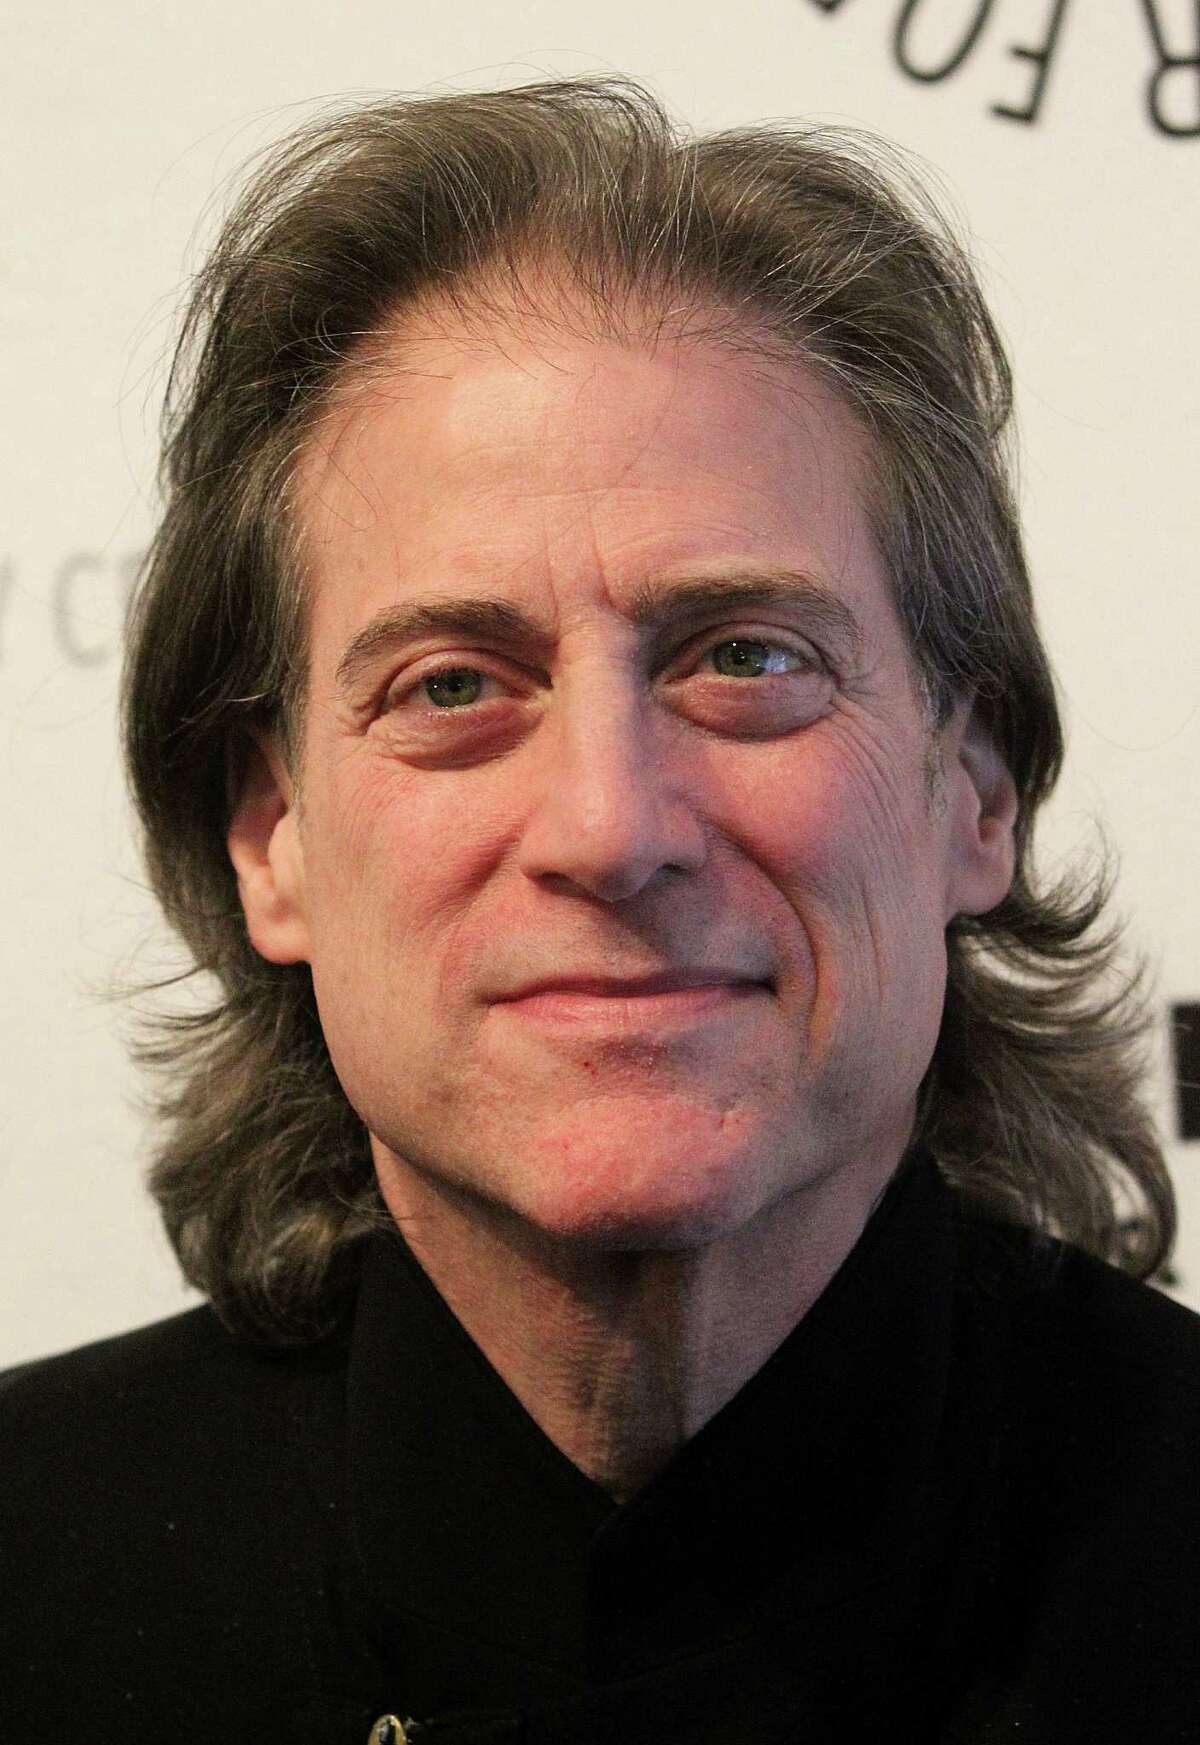 Comedian Richard Lewis attends the 27th annual PaleyFest Presents 'Curb Your Enthusiasm' event at the Saban Theatre on March 14, 2010 in Beverly Hills, California. BEVERLY HILLS, CA - MARCH 14: Comedian Richard Lewis attends the 27th annual PaleyFest Presents "Curb Your Enthusiasm" event at the Saban Theatre on March 14, 2010 in Beverly Hills, California. (Photo by Frederick M. Brown/Getty Images)